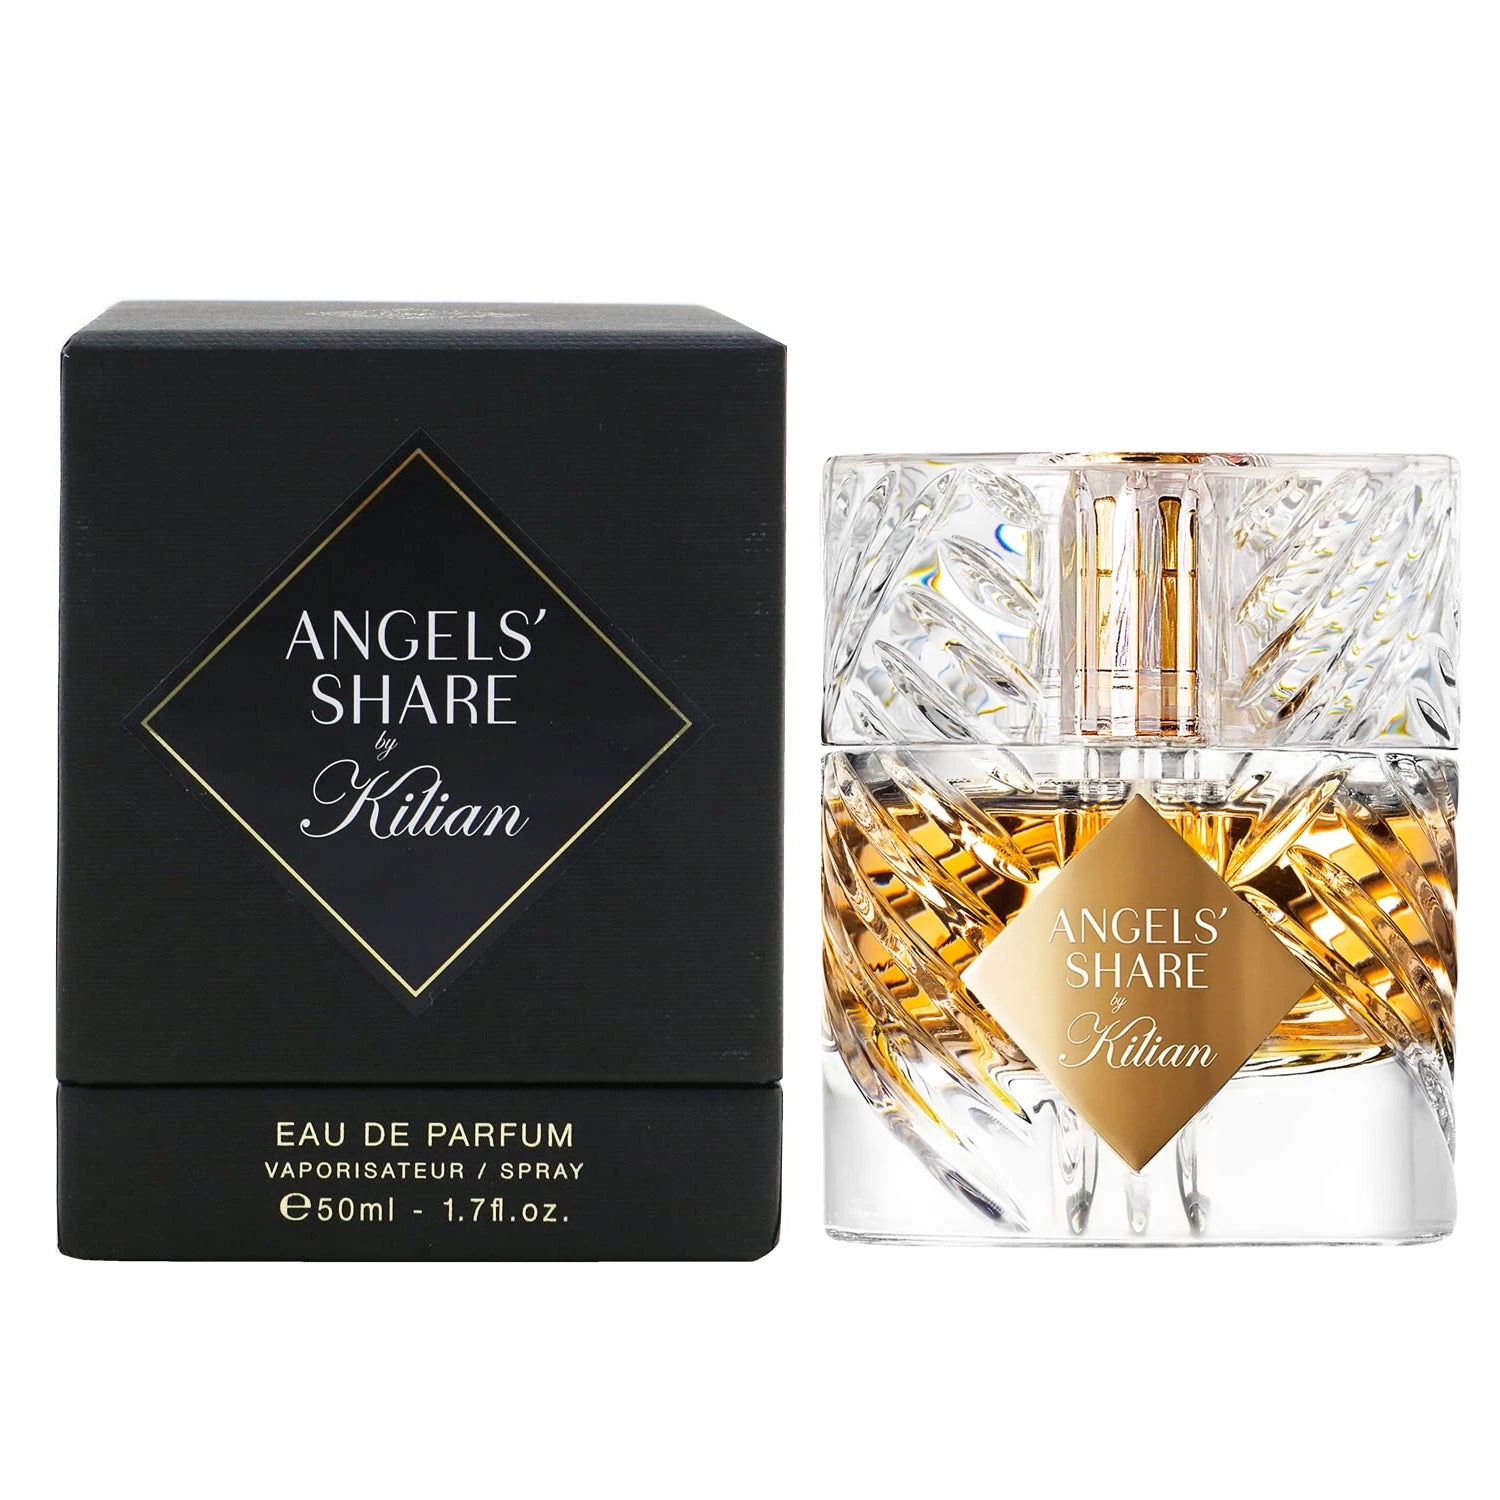 <meta charset="utf-8"><span data-mce-fragment="1">The Angels‘ Share Eau De Parfum contains the essence of cognac derived from the liquor to lend it a natural caramel color. It opens with cognac oil upon a blend of oak absolute, cinnamon essence, and Tonka bean absolute, and the scent‘s long-lasting notes of sandalwood, praline, and vanilla make for a delicious finish.<meta charset="utf-8">This fragrance is part of The Liquors collection. Kilian Hennessy wanted to pay tribute to his heritage as heir to the renowned French cognac family.</span><br data-mce-fragment="1"><br data-mce-fragment="1"><span data-mce-fragment="1">The perfume bottles in The Liquors collection are styled as a speakeasy essential, like an art deco glass to recall the most fabulous bars. The weighted glass is engraved with the emblematic K motif to throw and catch light at all angles and finished with a golden, diamond-shaped plaque signed in white serigraphy. These details bring to the Kilian Paris creation a guarantee of luxury that should not be ephemeral but should last a lifetime. As such, this perfume is refillable.<br><br><meta charset="utf-8"> <meta charset="utf-8"> <b data-mce-fragment="1">Fragrance Family:</b> Warm &amp; Spicy<br data-mce-fragment="1"><b data-mce-fragment="1">Scent Type:</b> Warm &amp; Sweet Gourmands<br data-mce-fragment="1"><b data-mce-fragment="1">Key Notes:</b> Cognac, Tonka Bean and Oak Wood</span><br data-mce-fragment="1"><br>